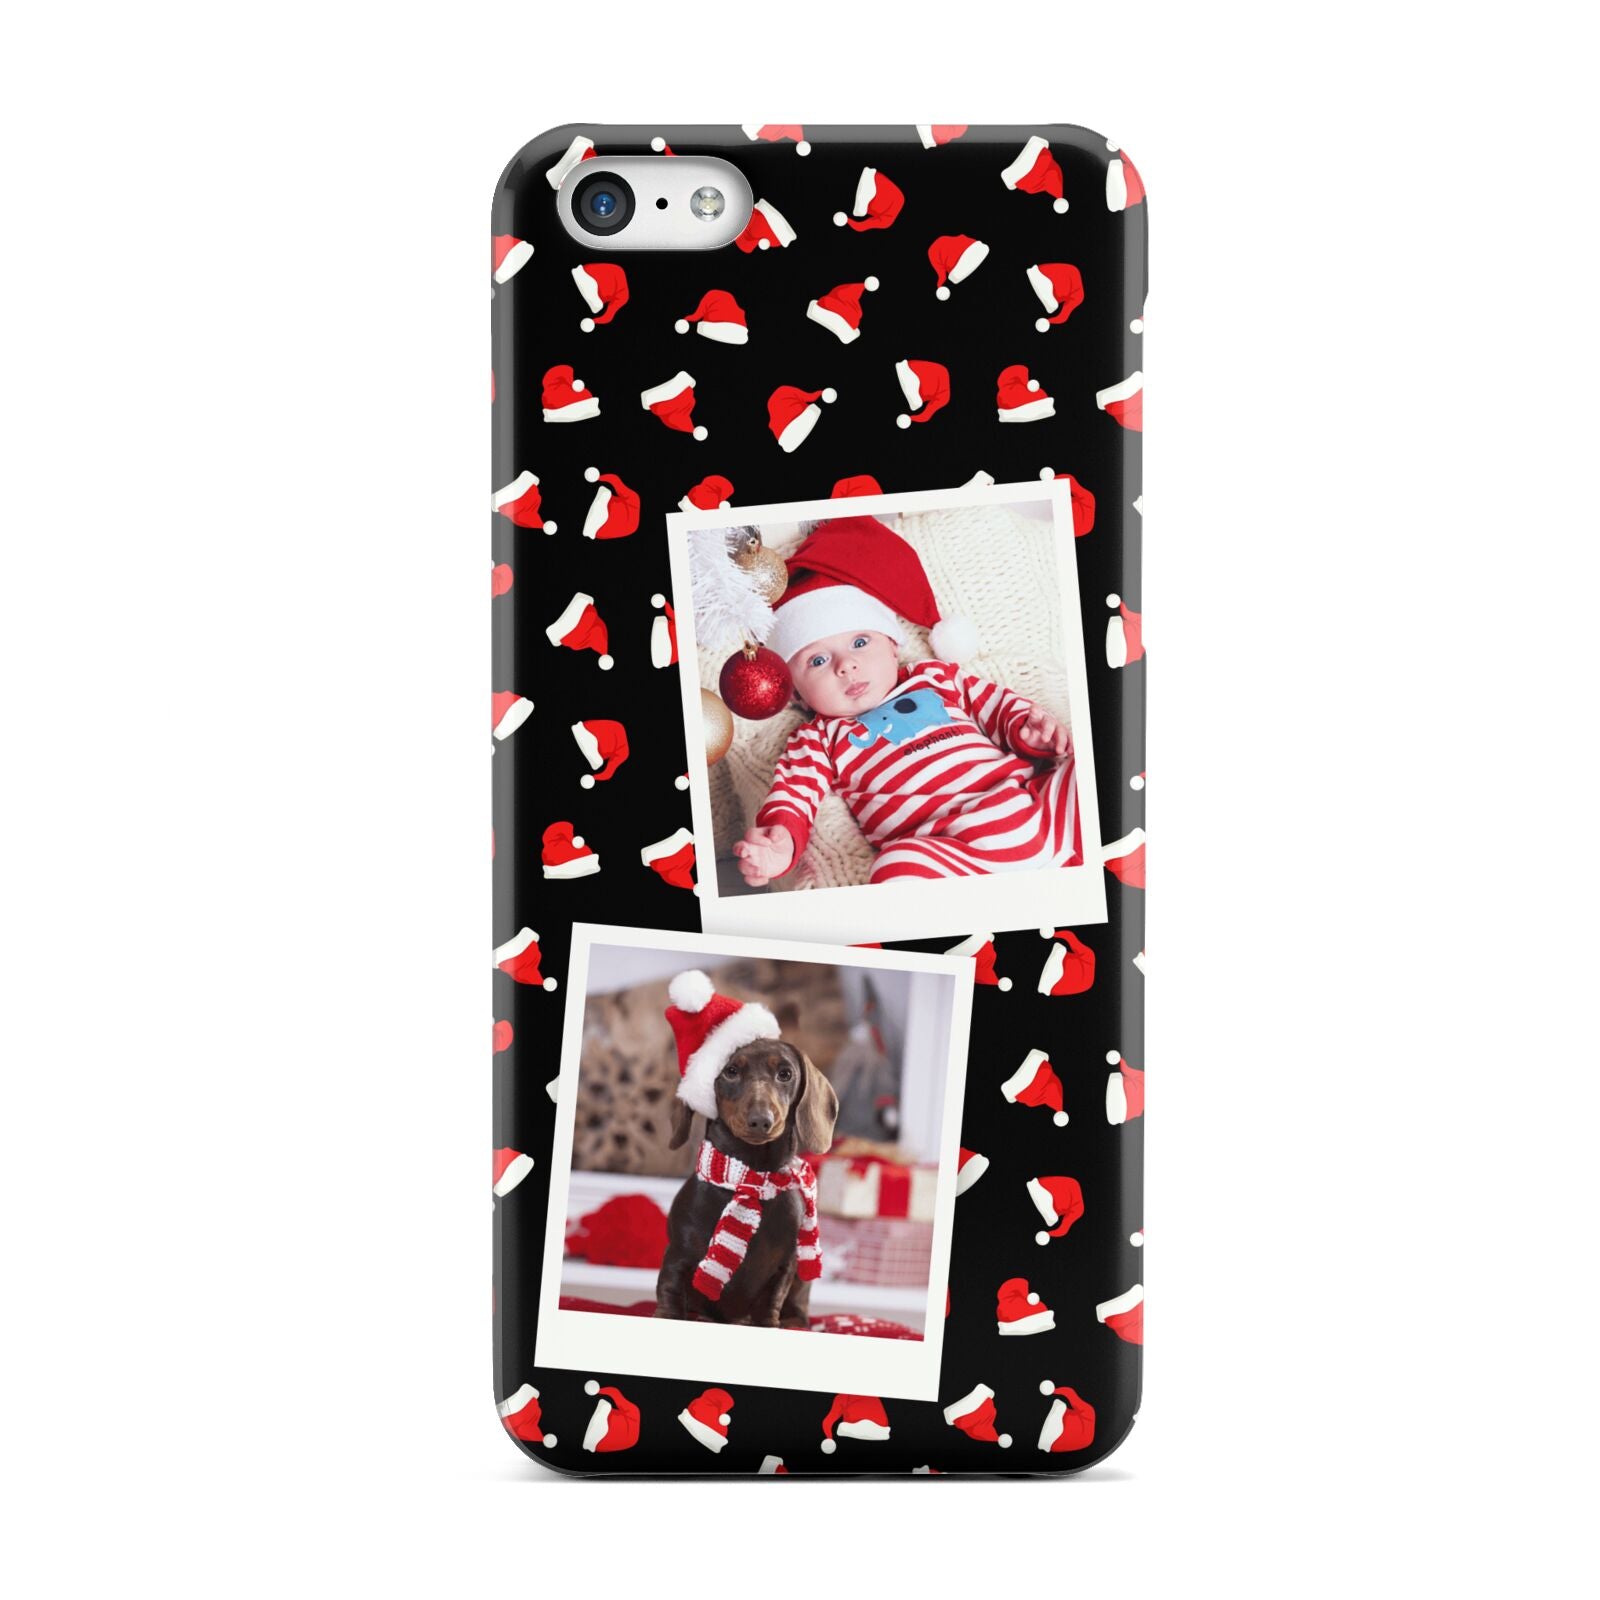 Christmas Two Photo Apple iPhone 5c Case